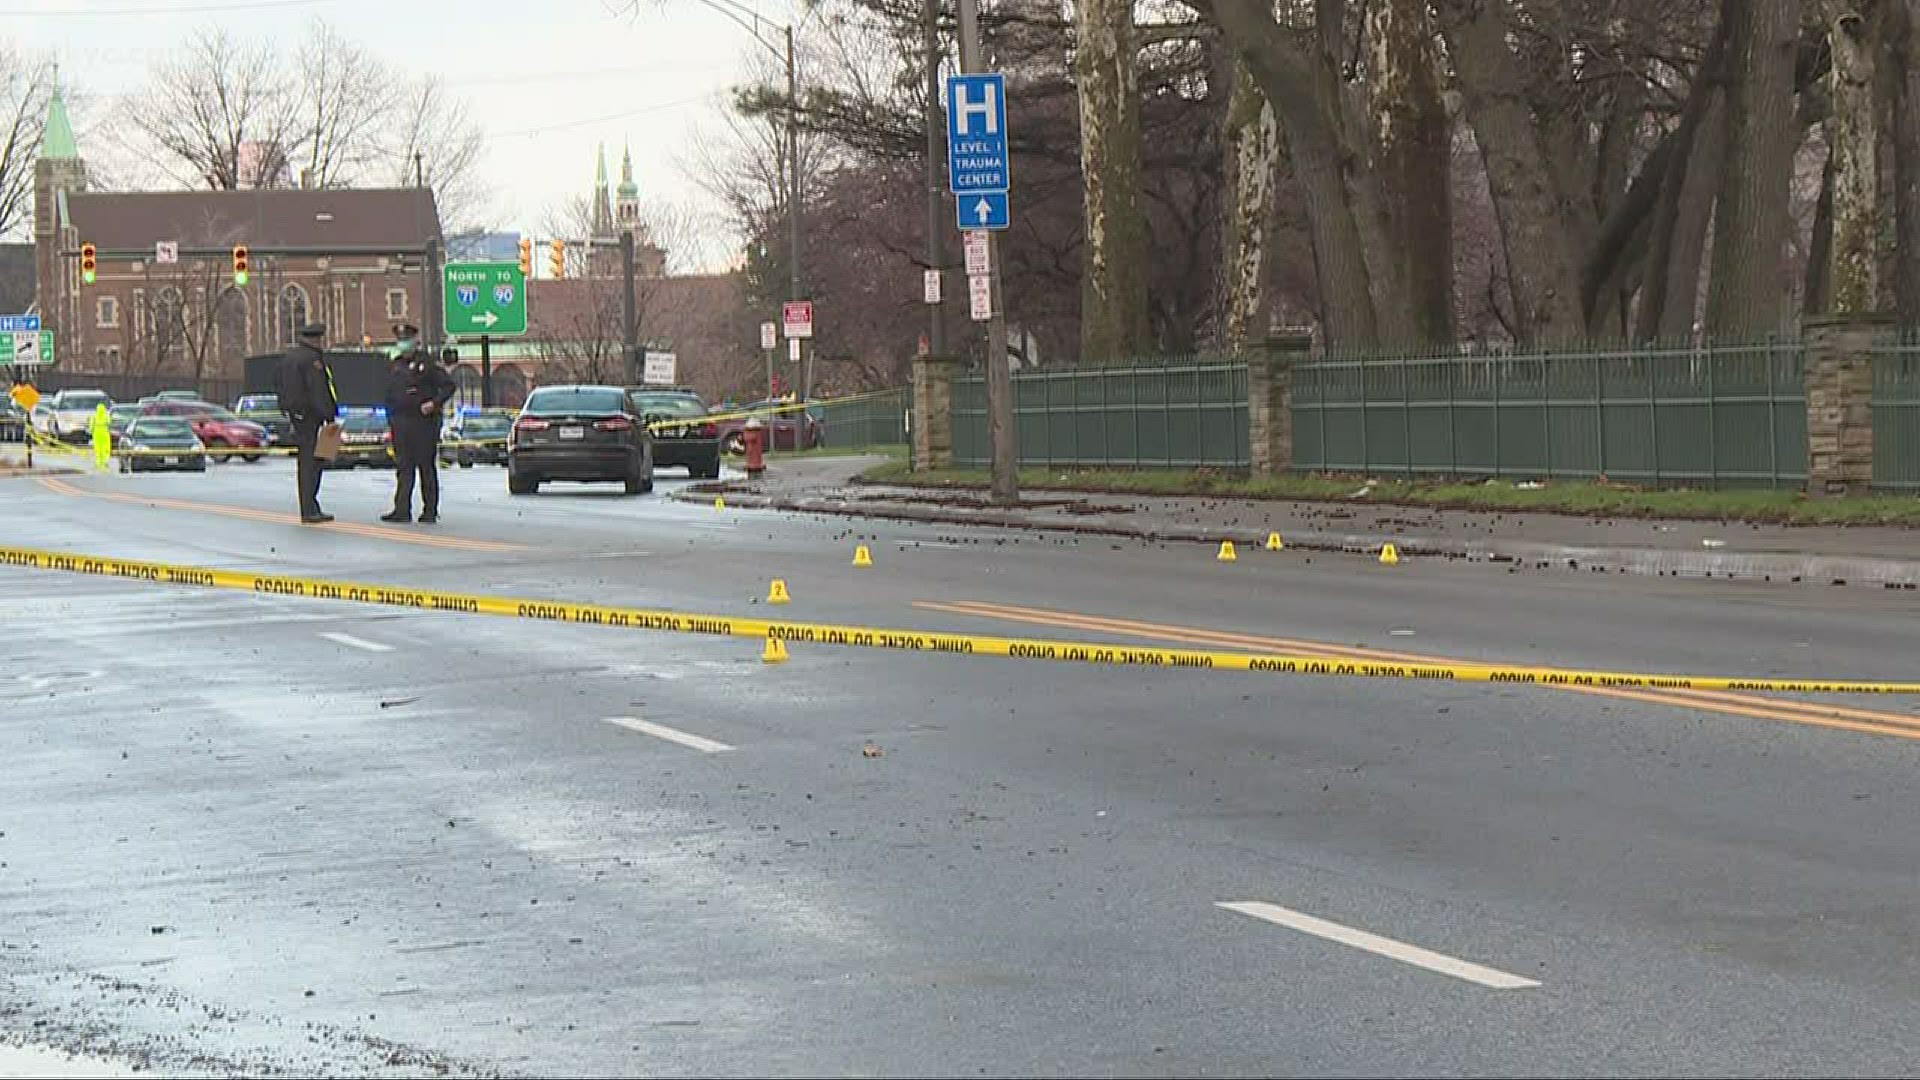 An off-duty Cleveland police officer fatally shot a 24-year-old man this afternoon near west 25th and pearl.The officer wasn't hurt.